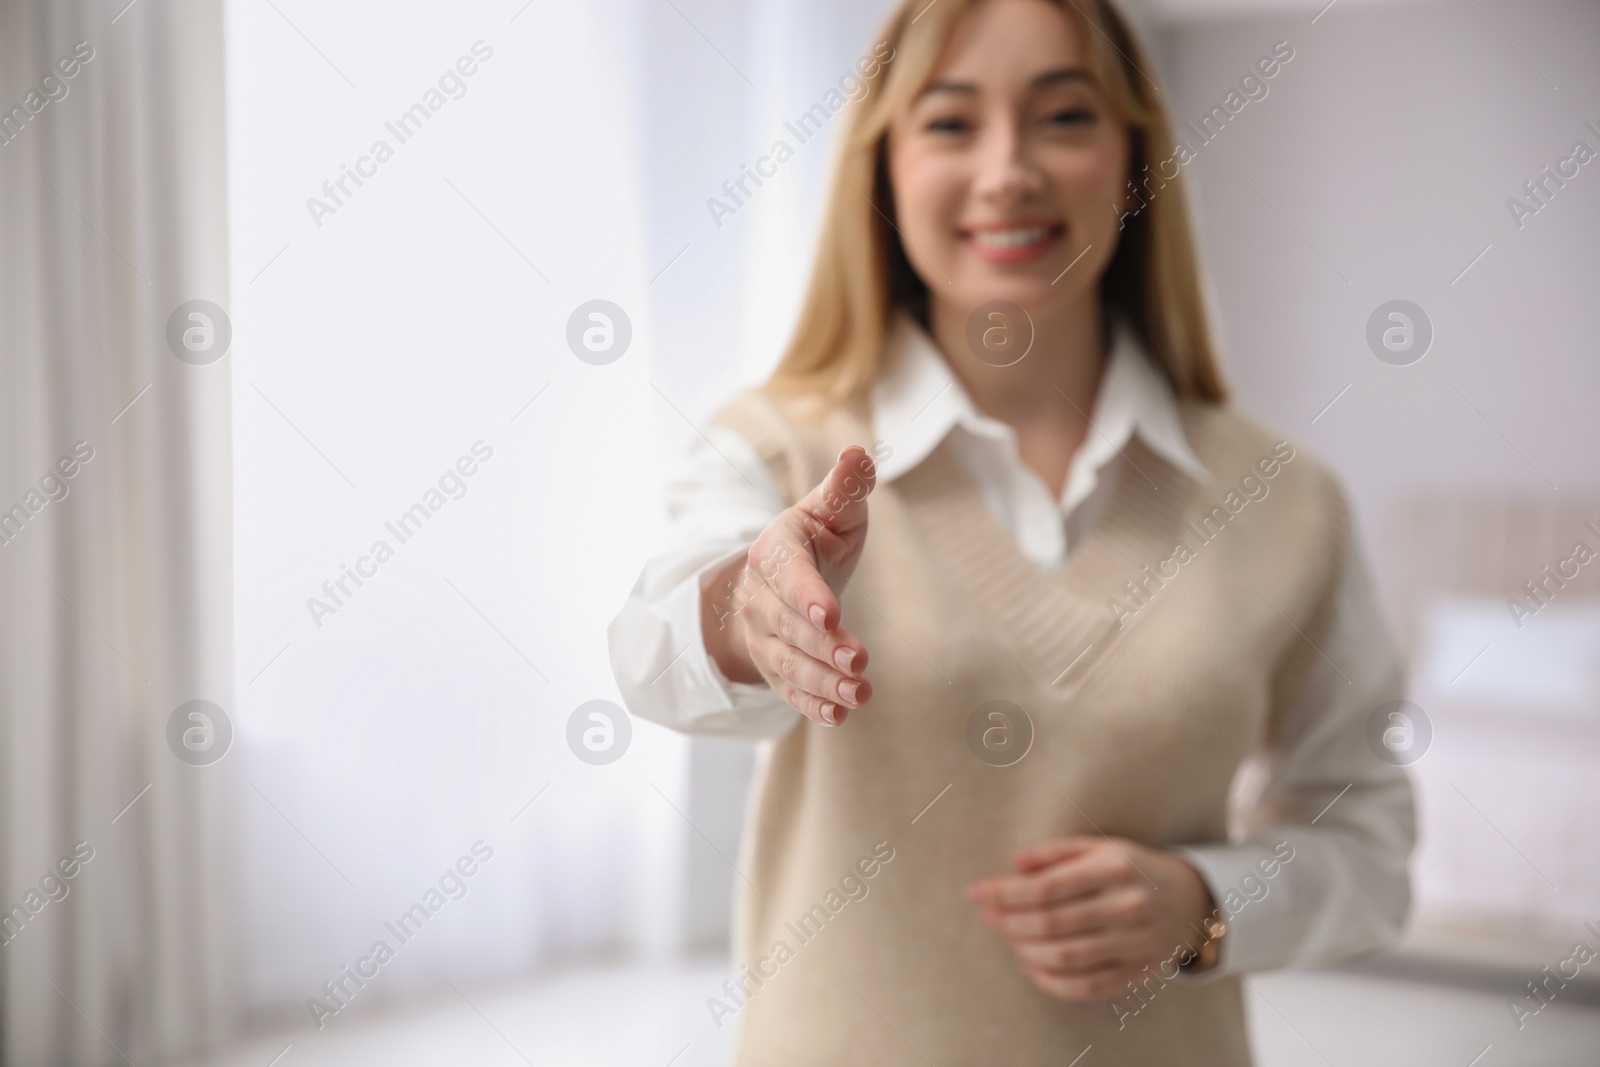 Photo of Happy young woman offering handshake indoors. Space for text